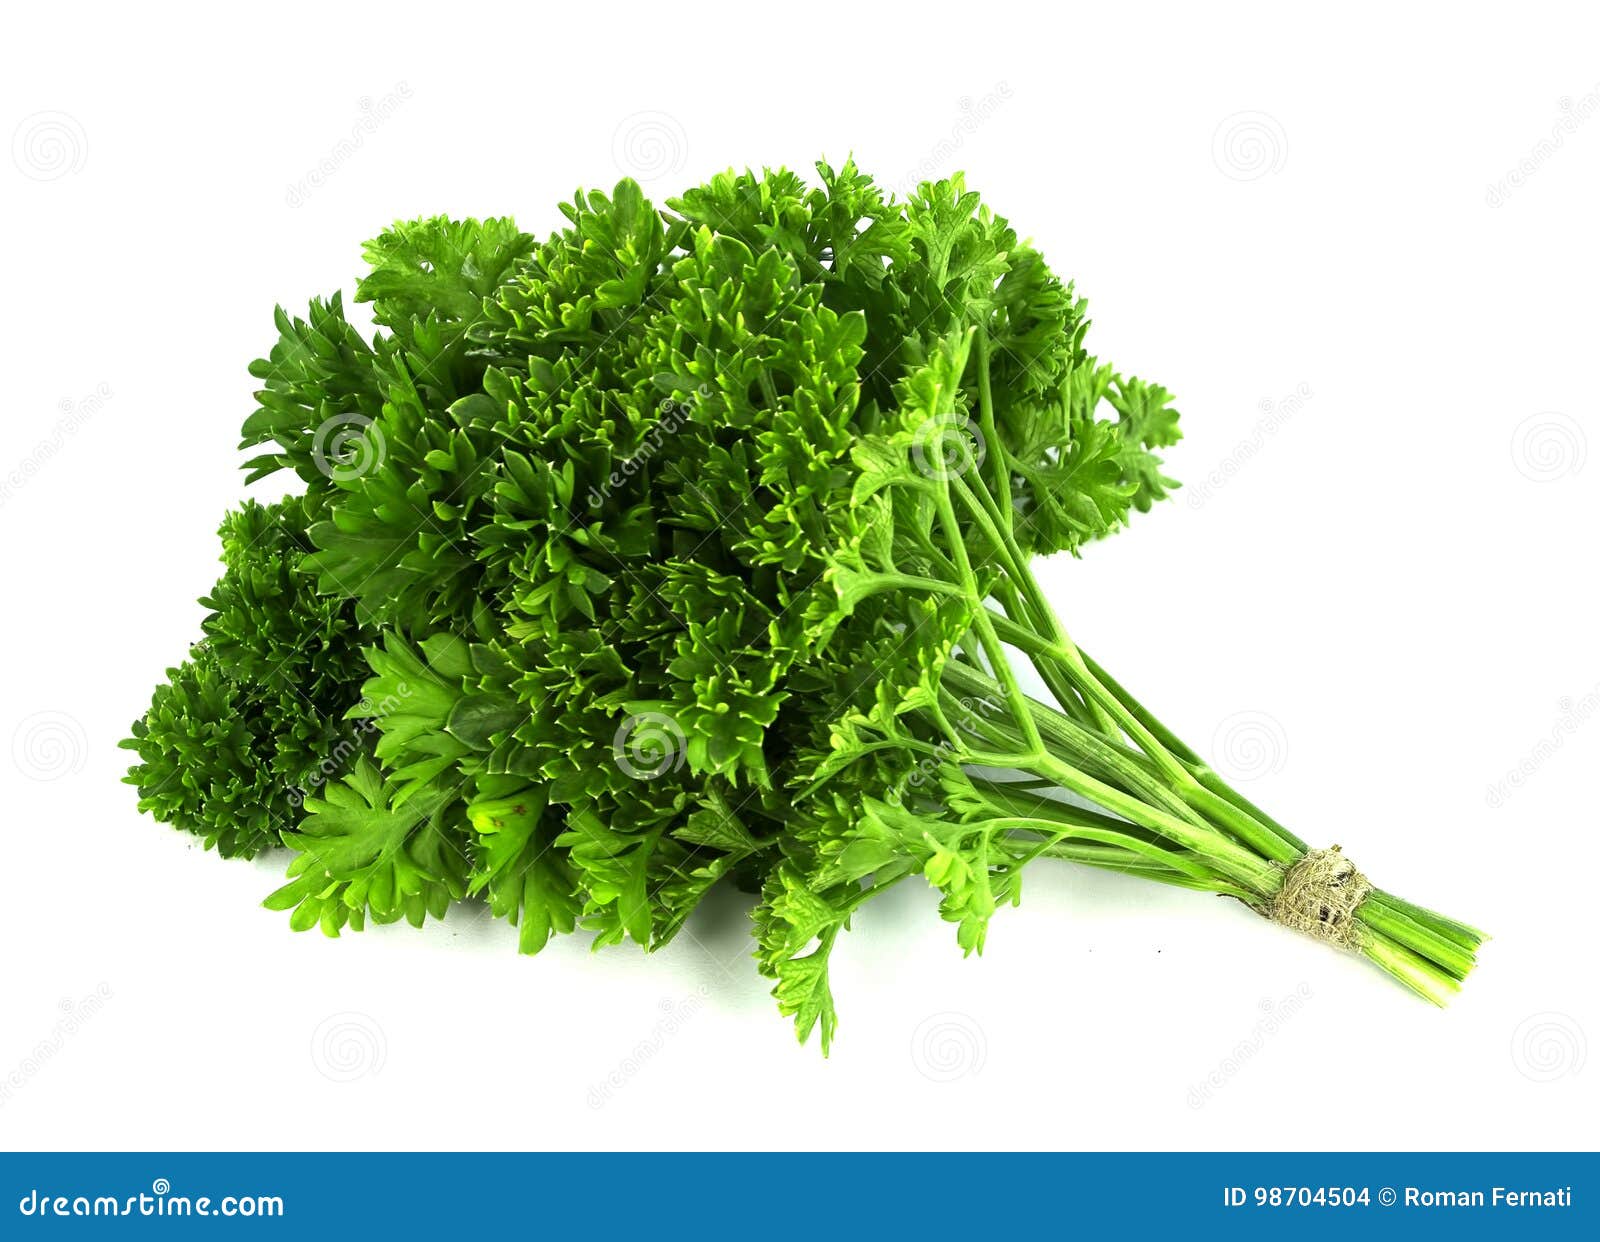 parsley bunch on white background